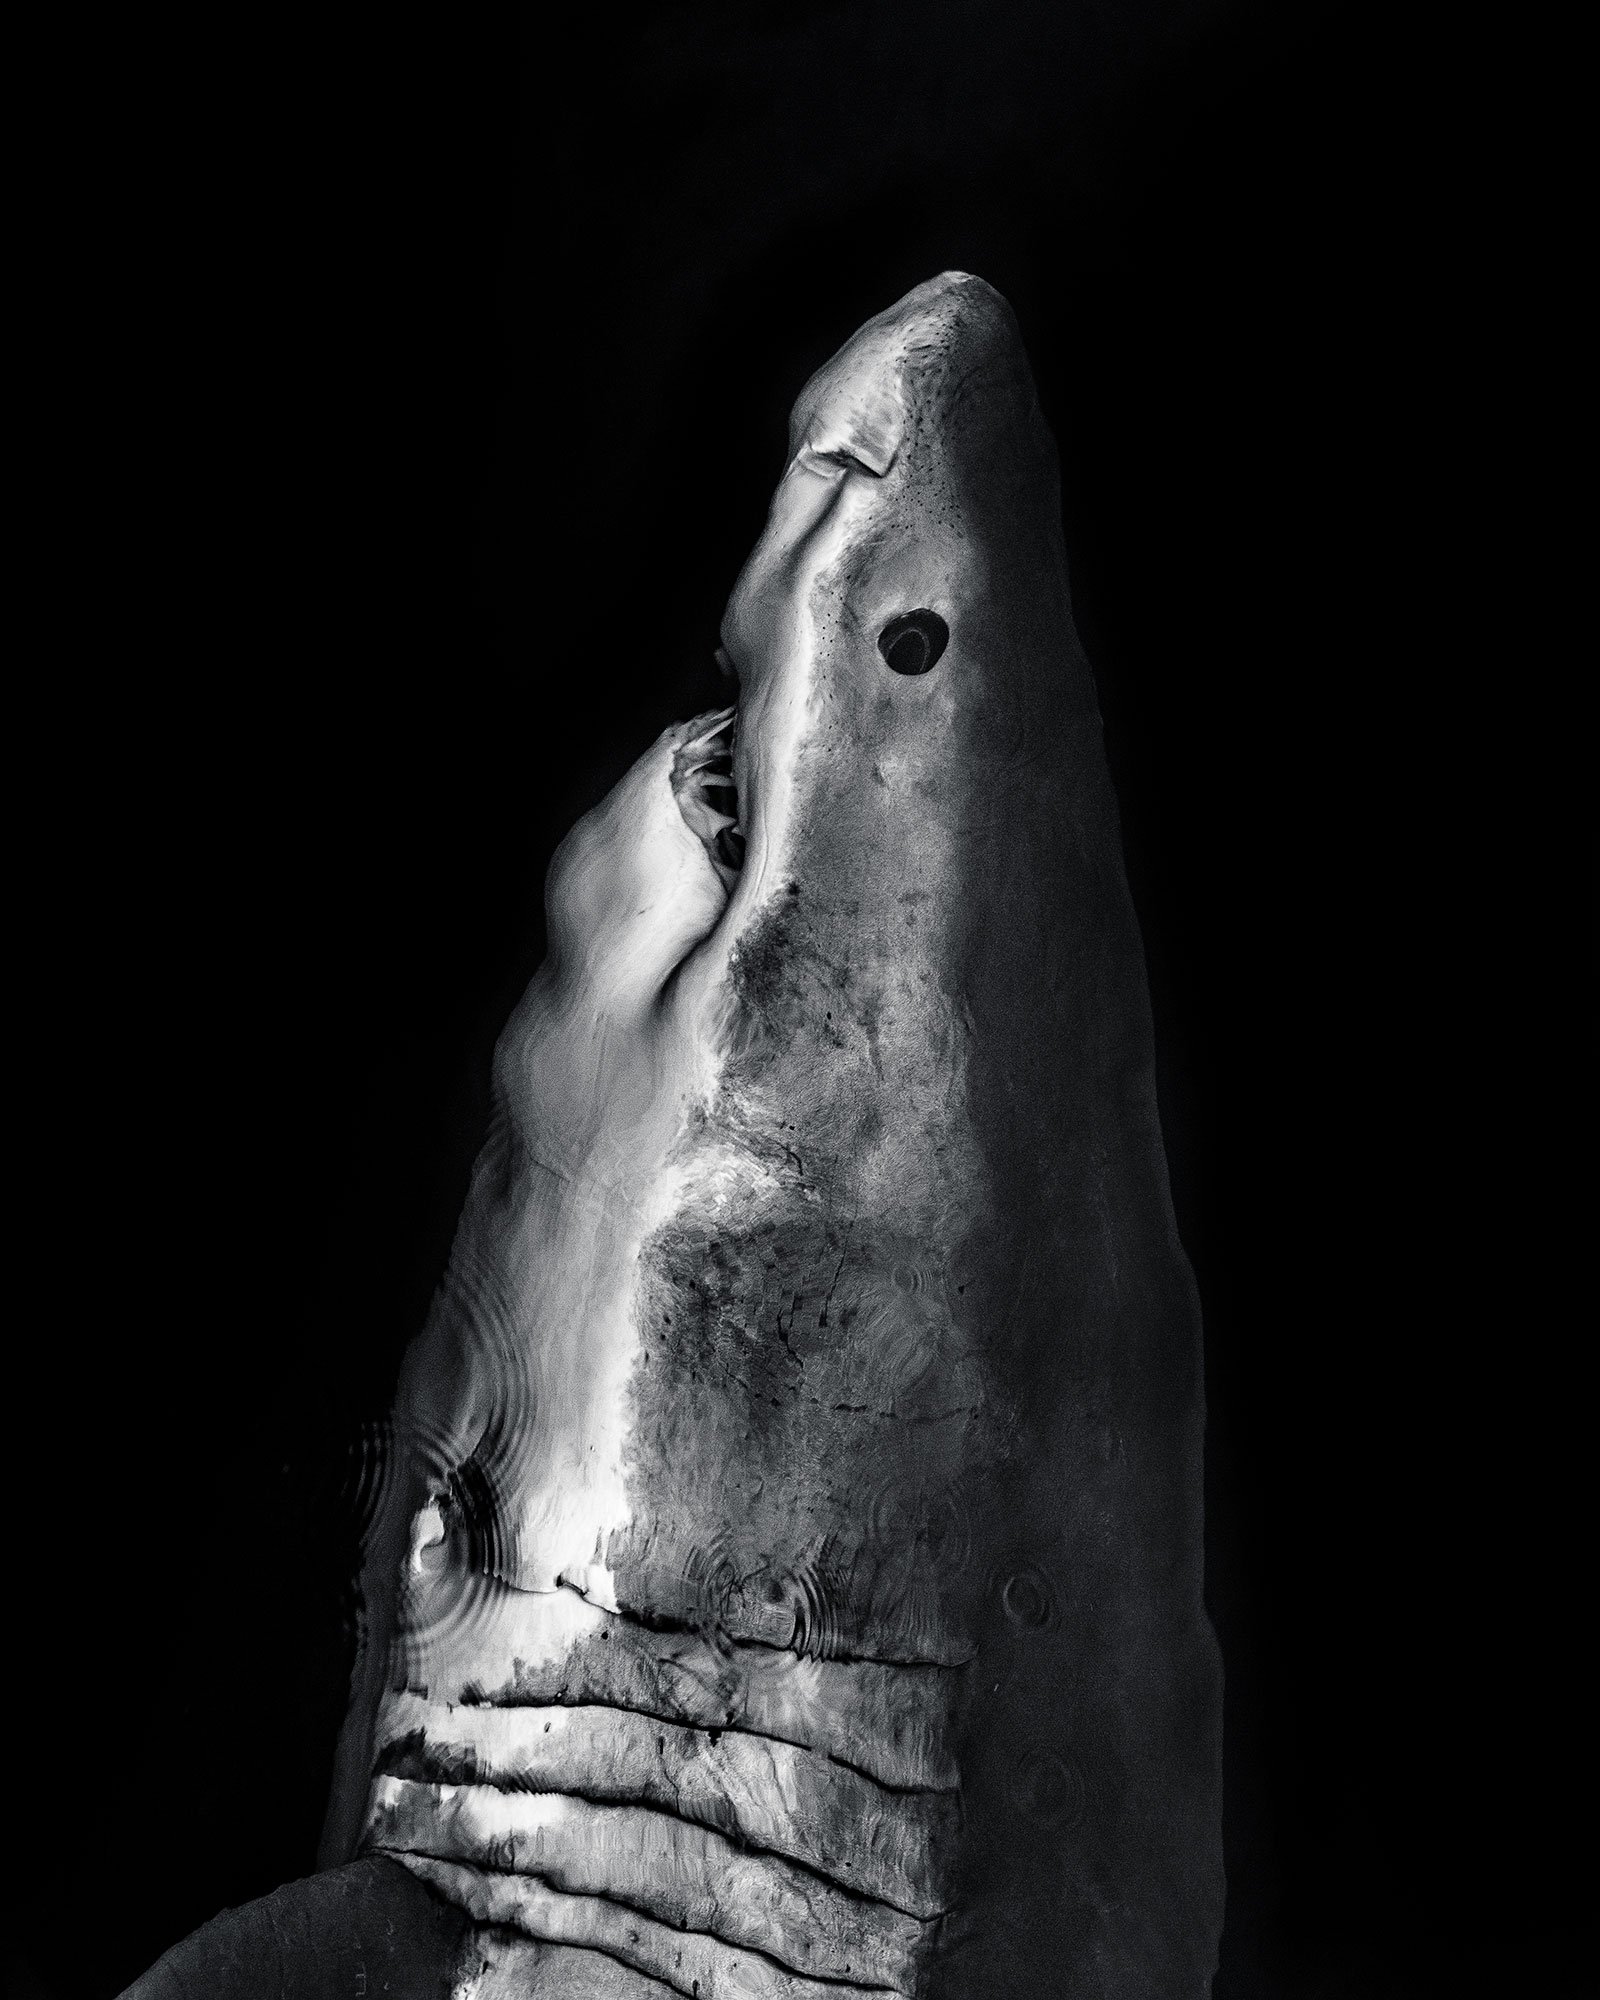 Profile image of a shark in black and white. Shark is against a black background